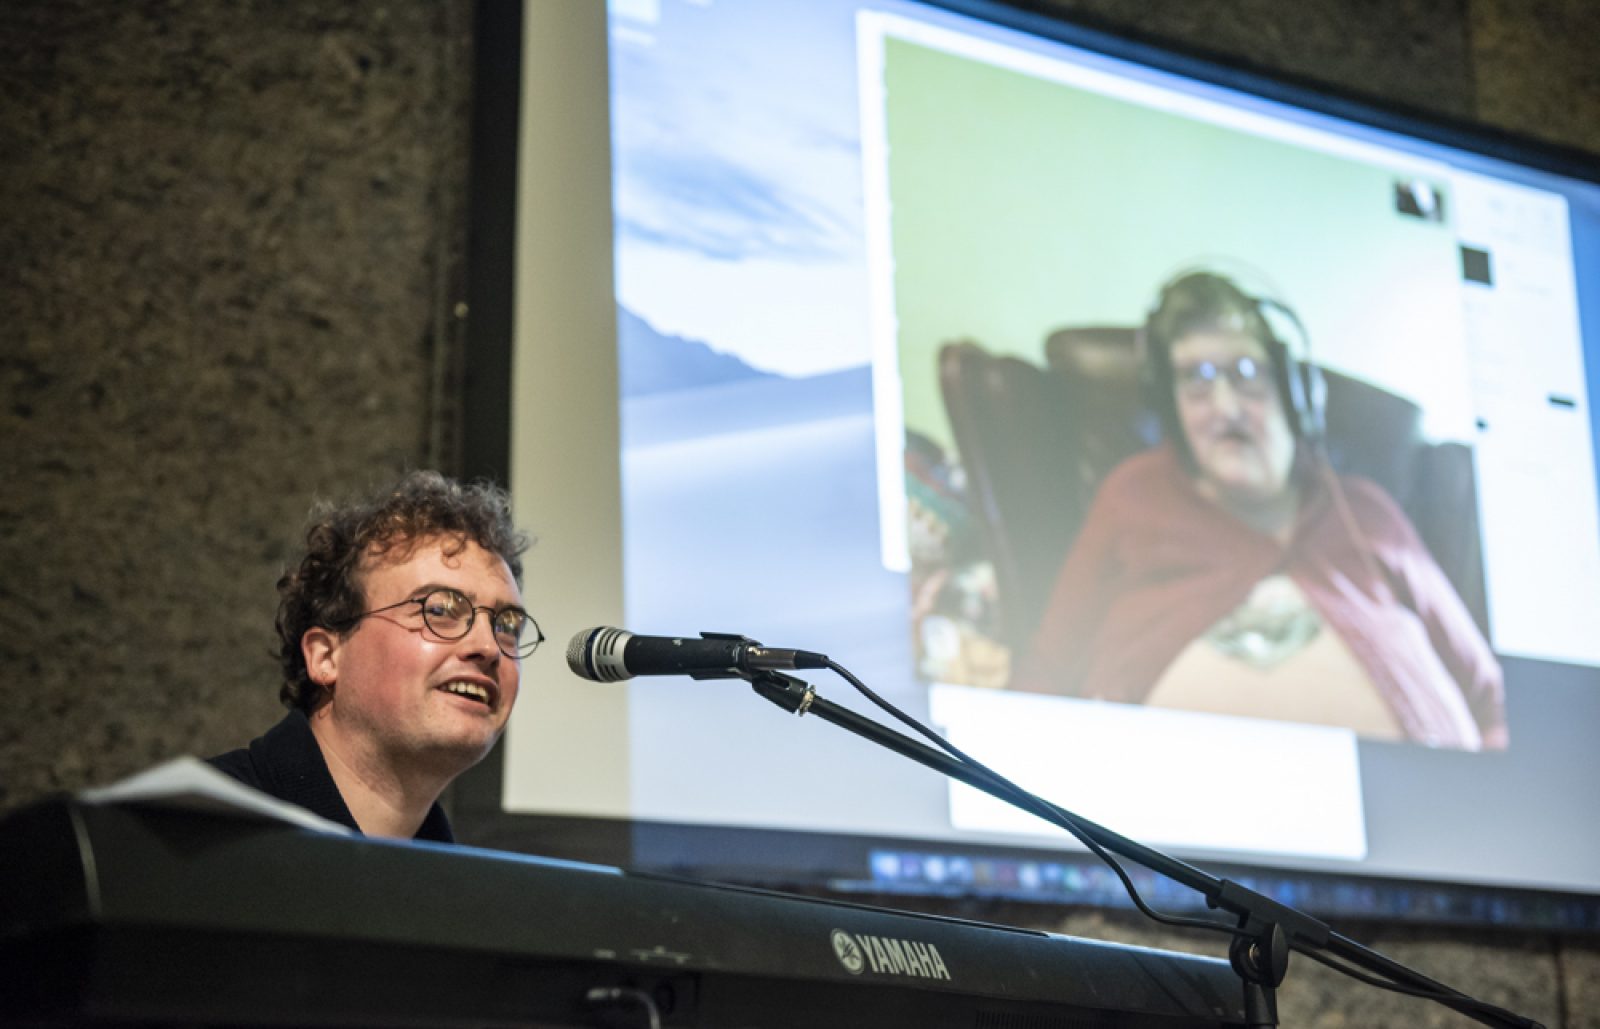 A person with short curly hair and glasses sits behind a Yamaha keyboard and a microphone smiling. On a projector screen behind them there is a person sitting in an arm chair with headphones on.